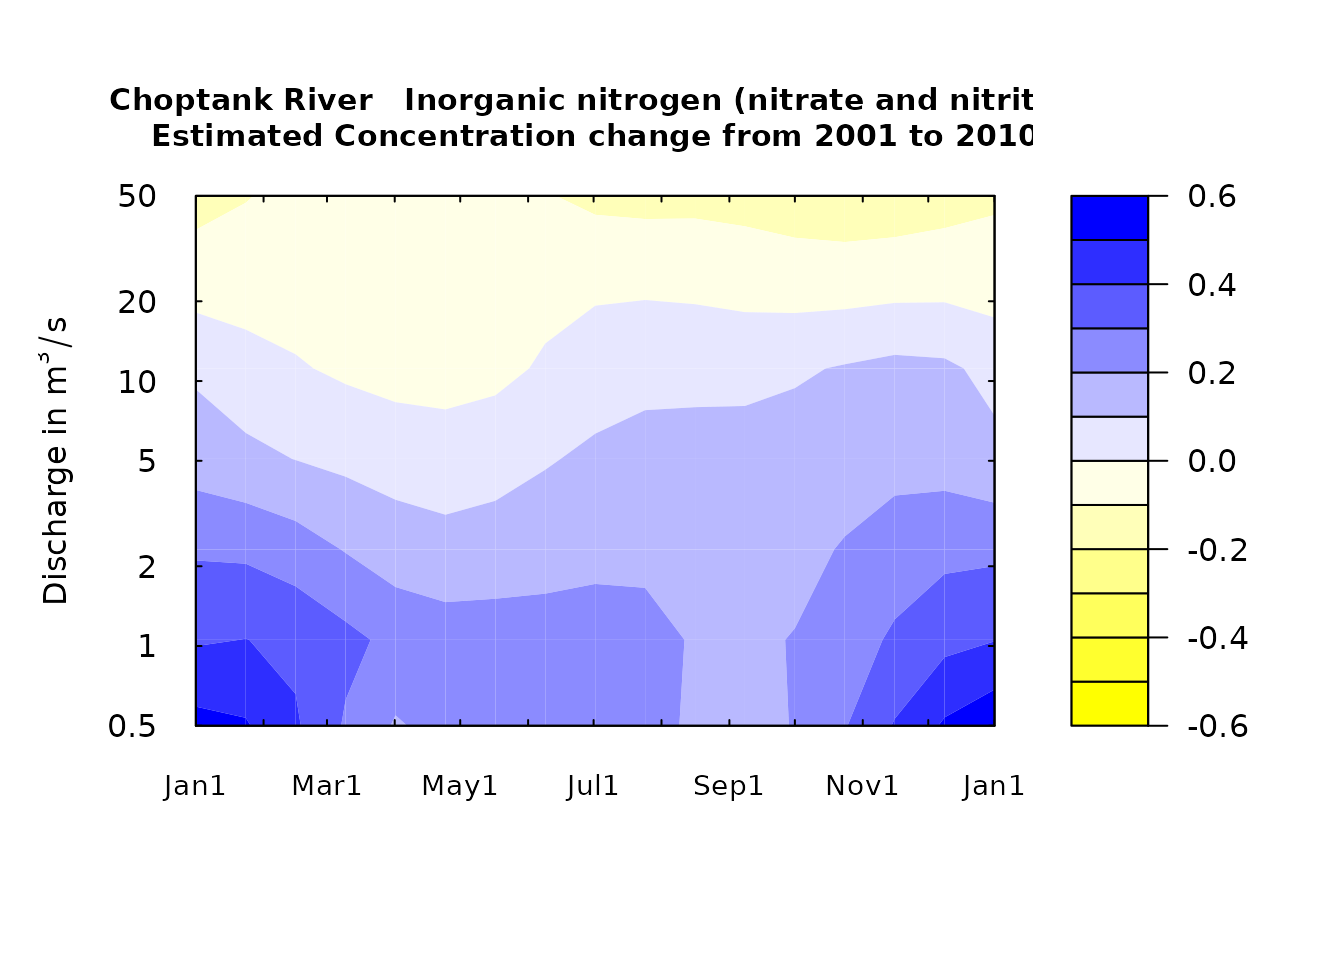 Difference contour plot with modified color scheme